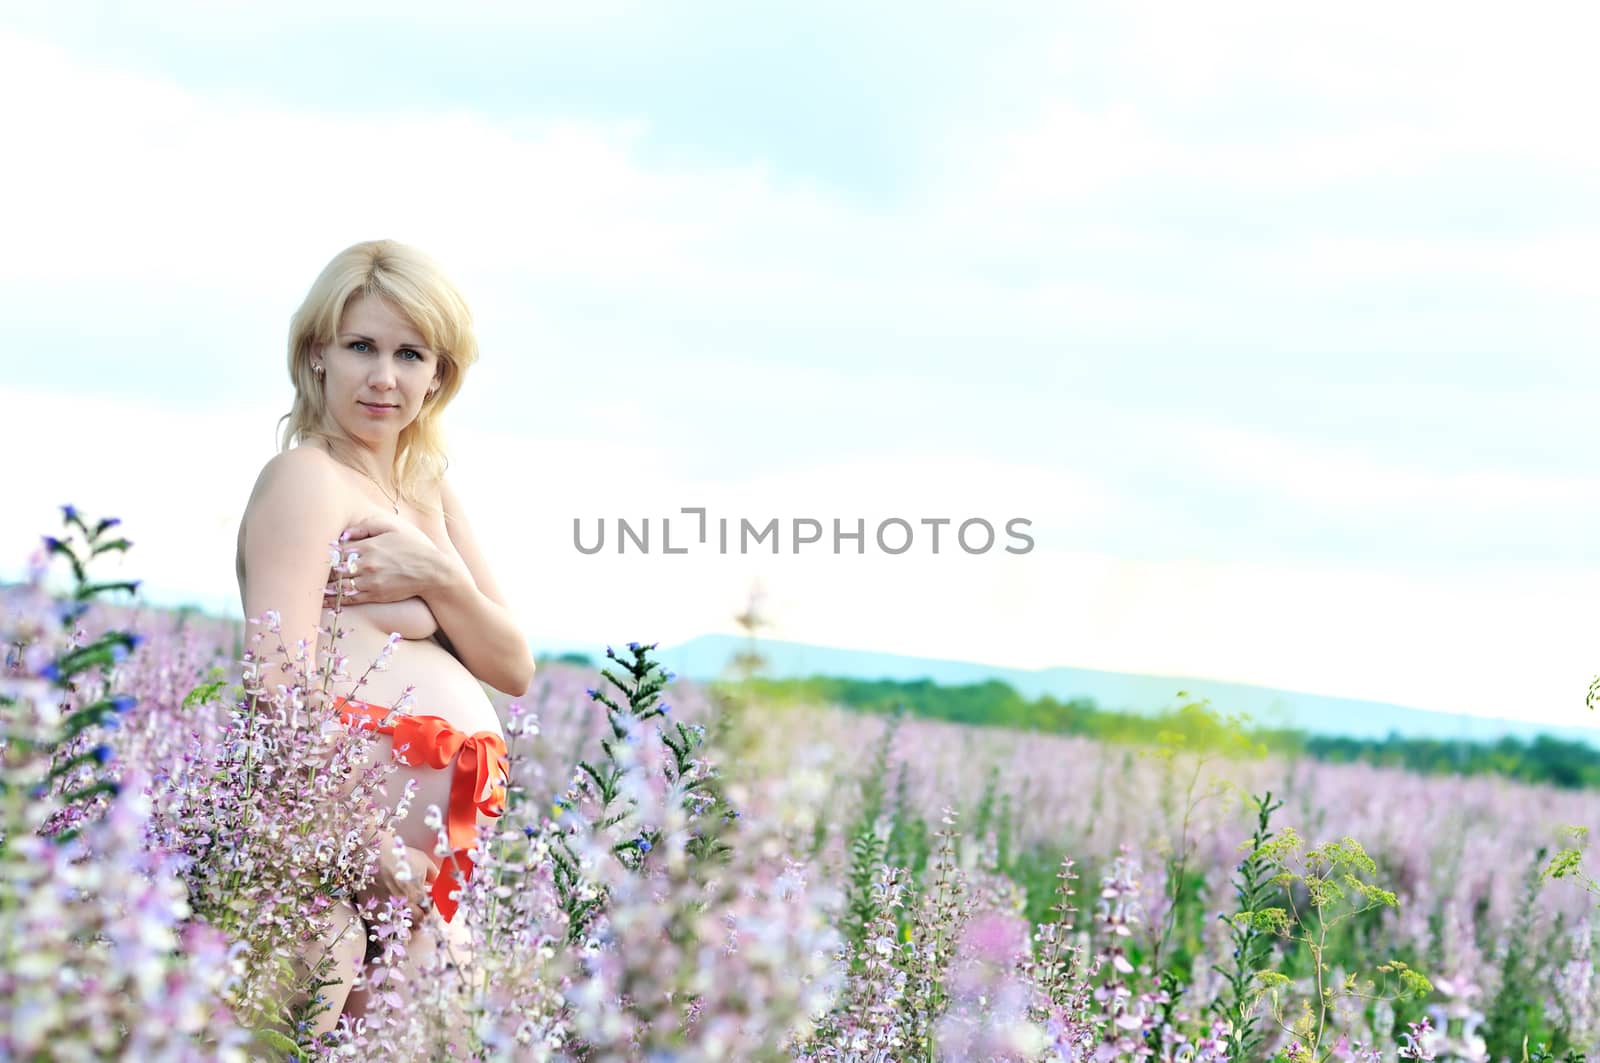 beauty blonde pregnant woman at one with nature with red belt on the belly